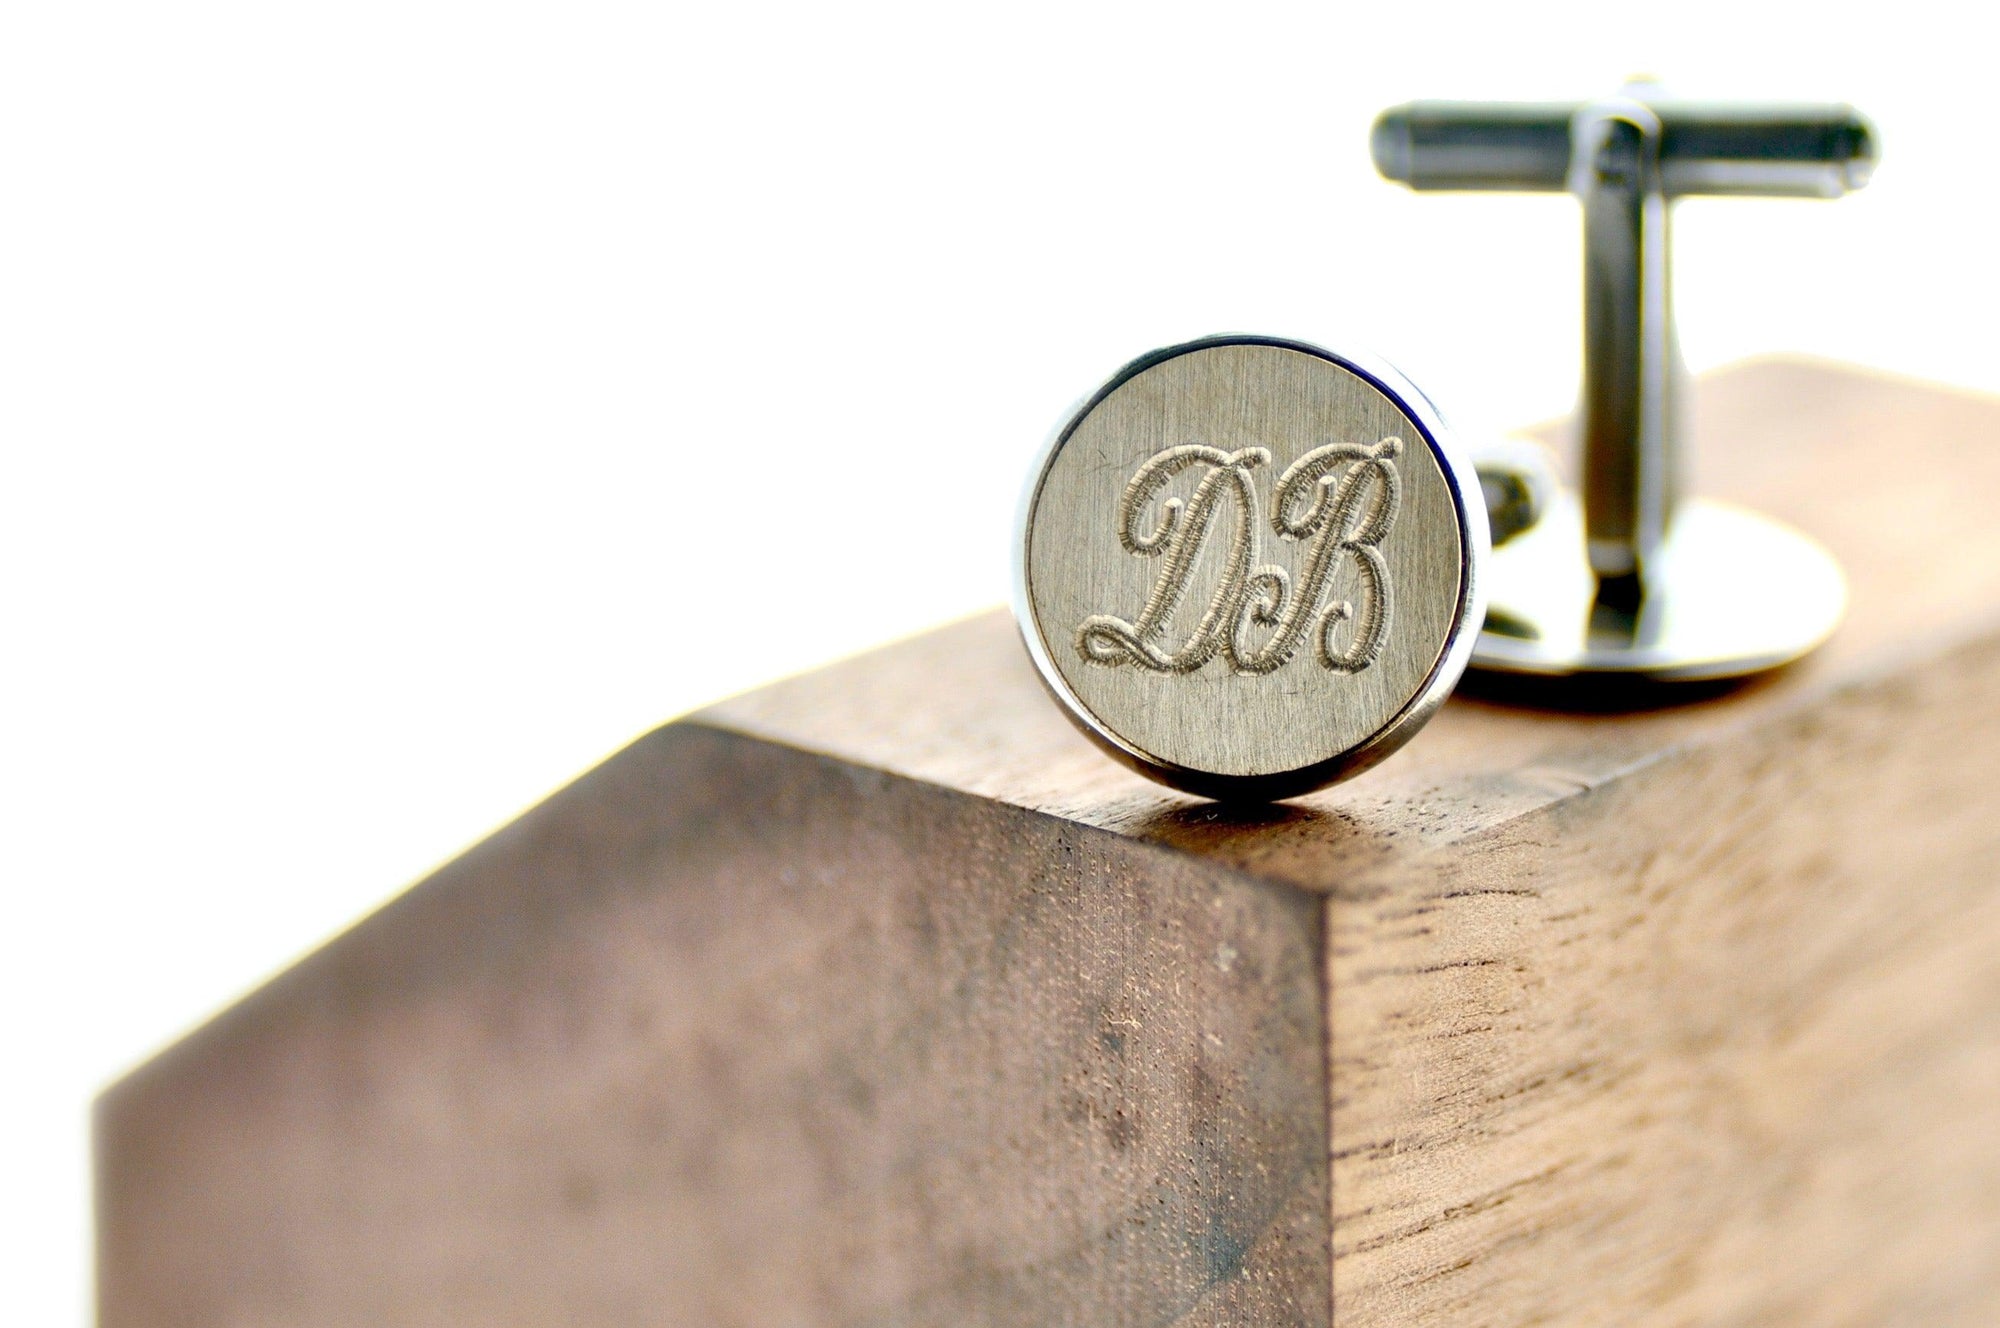 Line Double Initial Signet Cufflinks - Backtozero B20 - 14mm, 2 initials, 2initials, brass, cufflinks, Custom, double, Double Initials, him, monogram, Personalized, signet, stainless steel, Two initials, Wedding